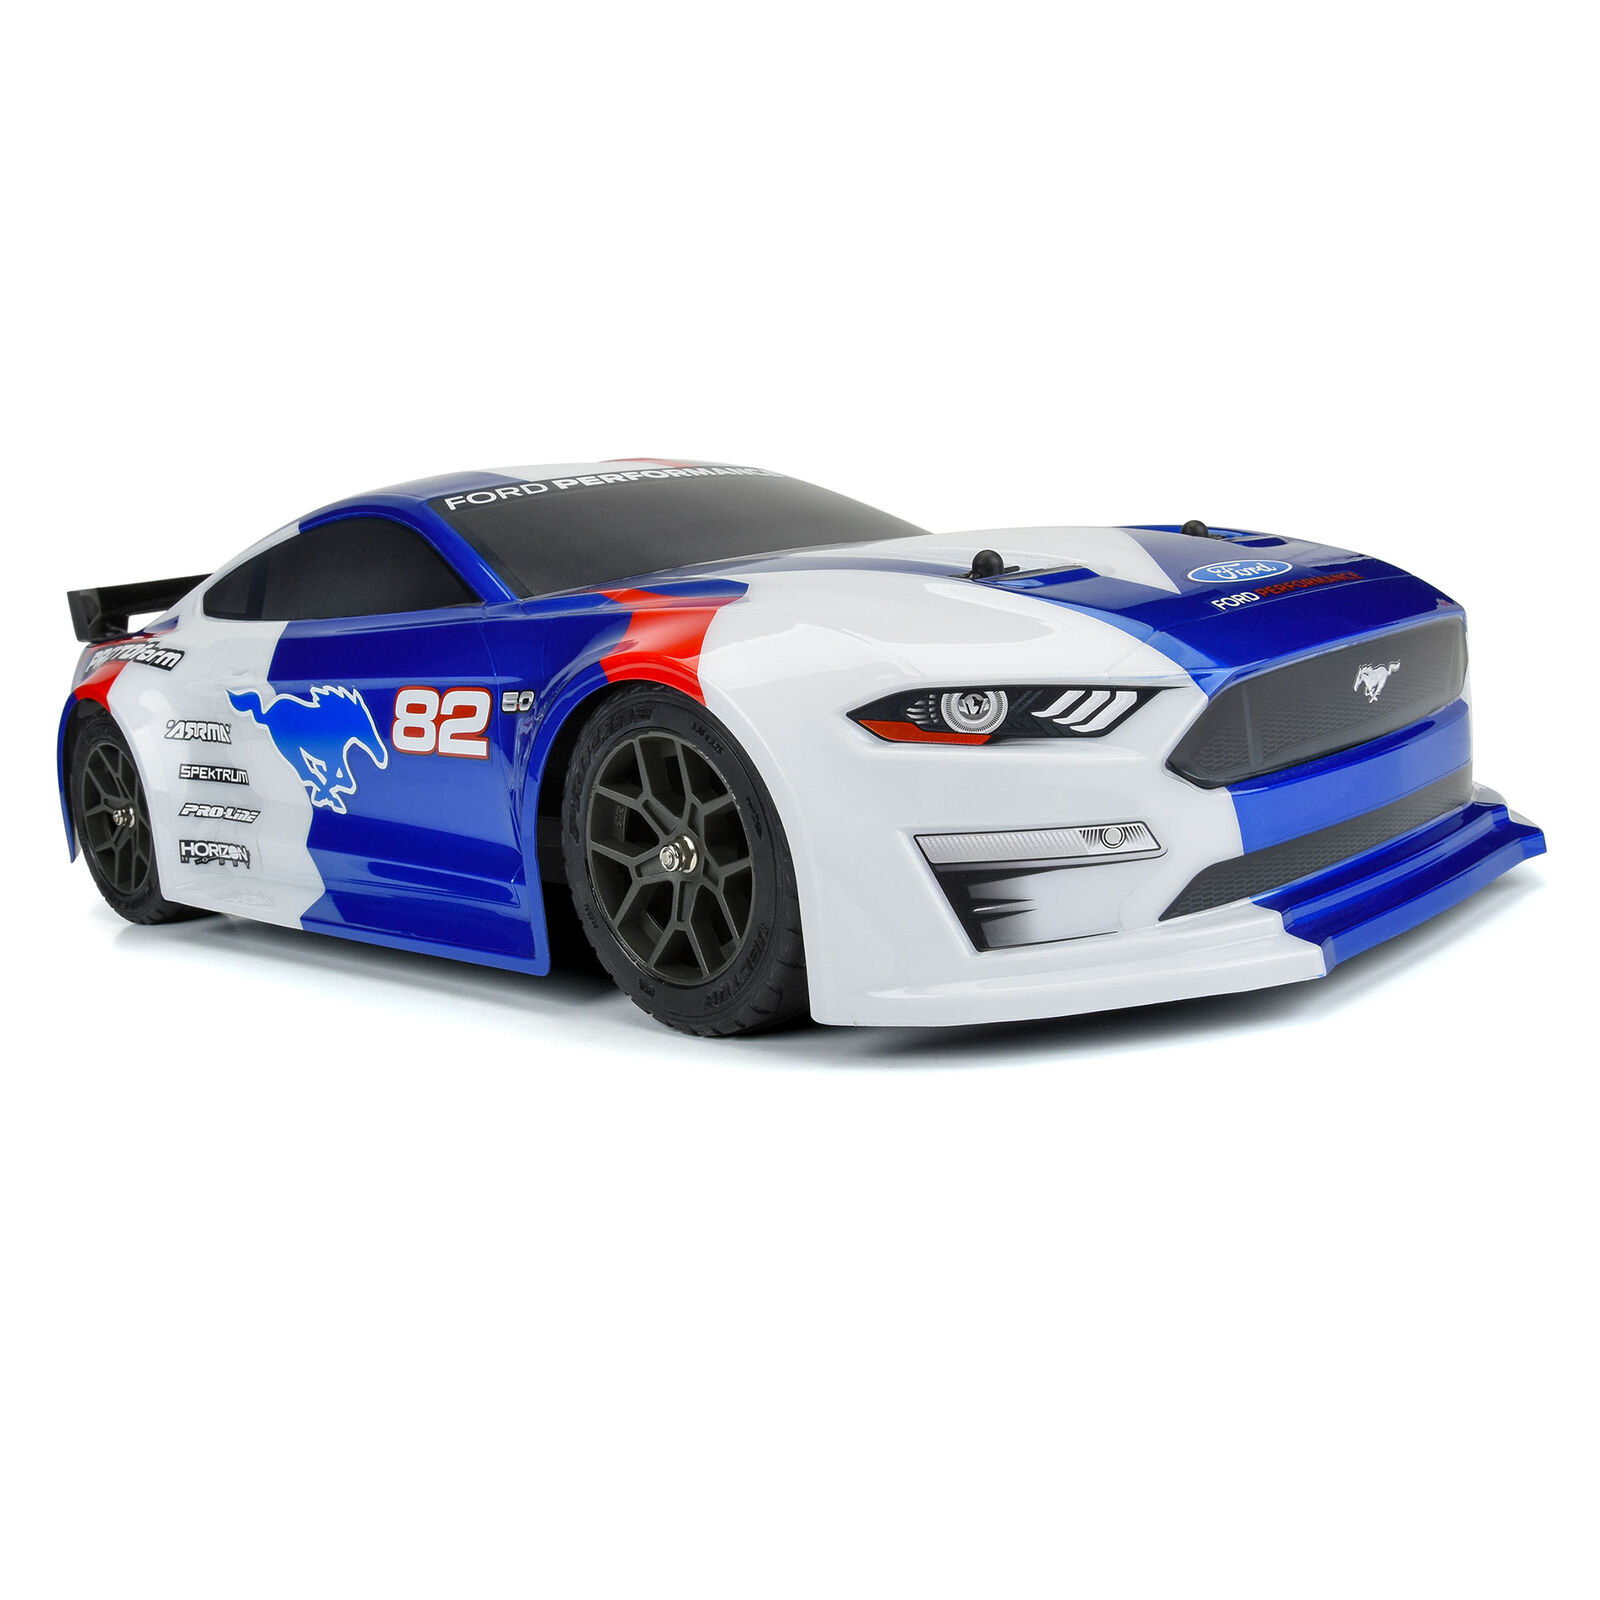 PROTOform - Pro-line Racing 1/8 2021 Ford Mustang Painted Body (Blue):  Vendetta & Infraction 3S | Pro-Line